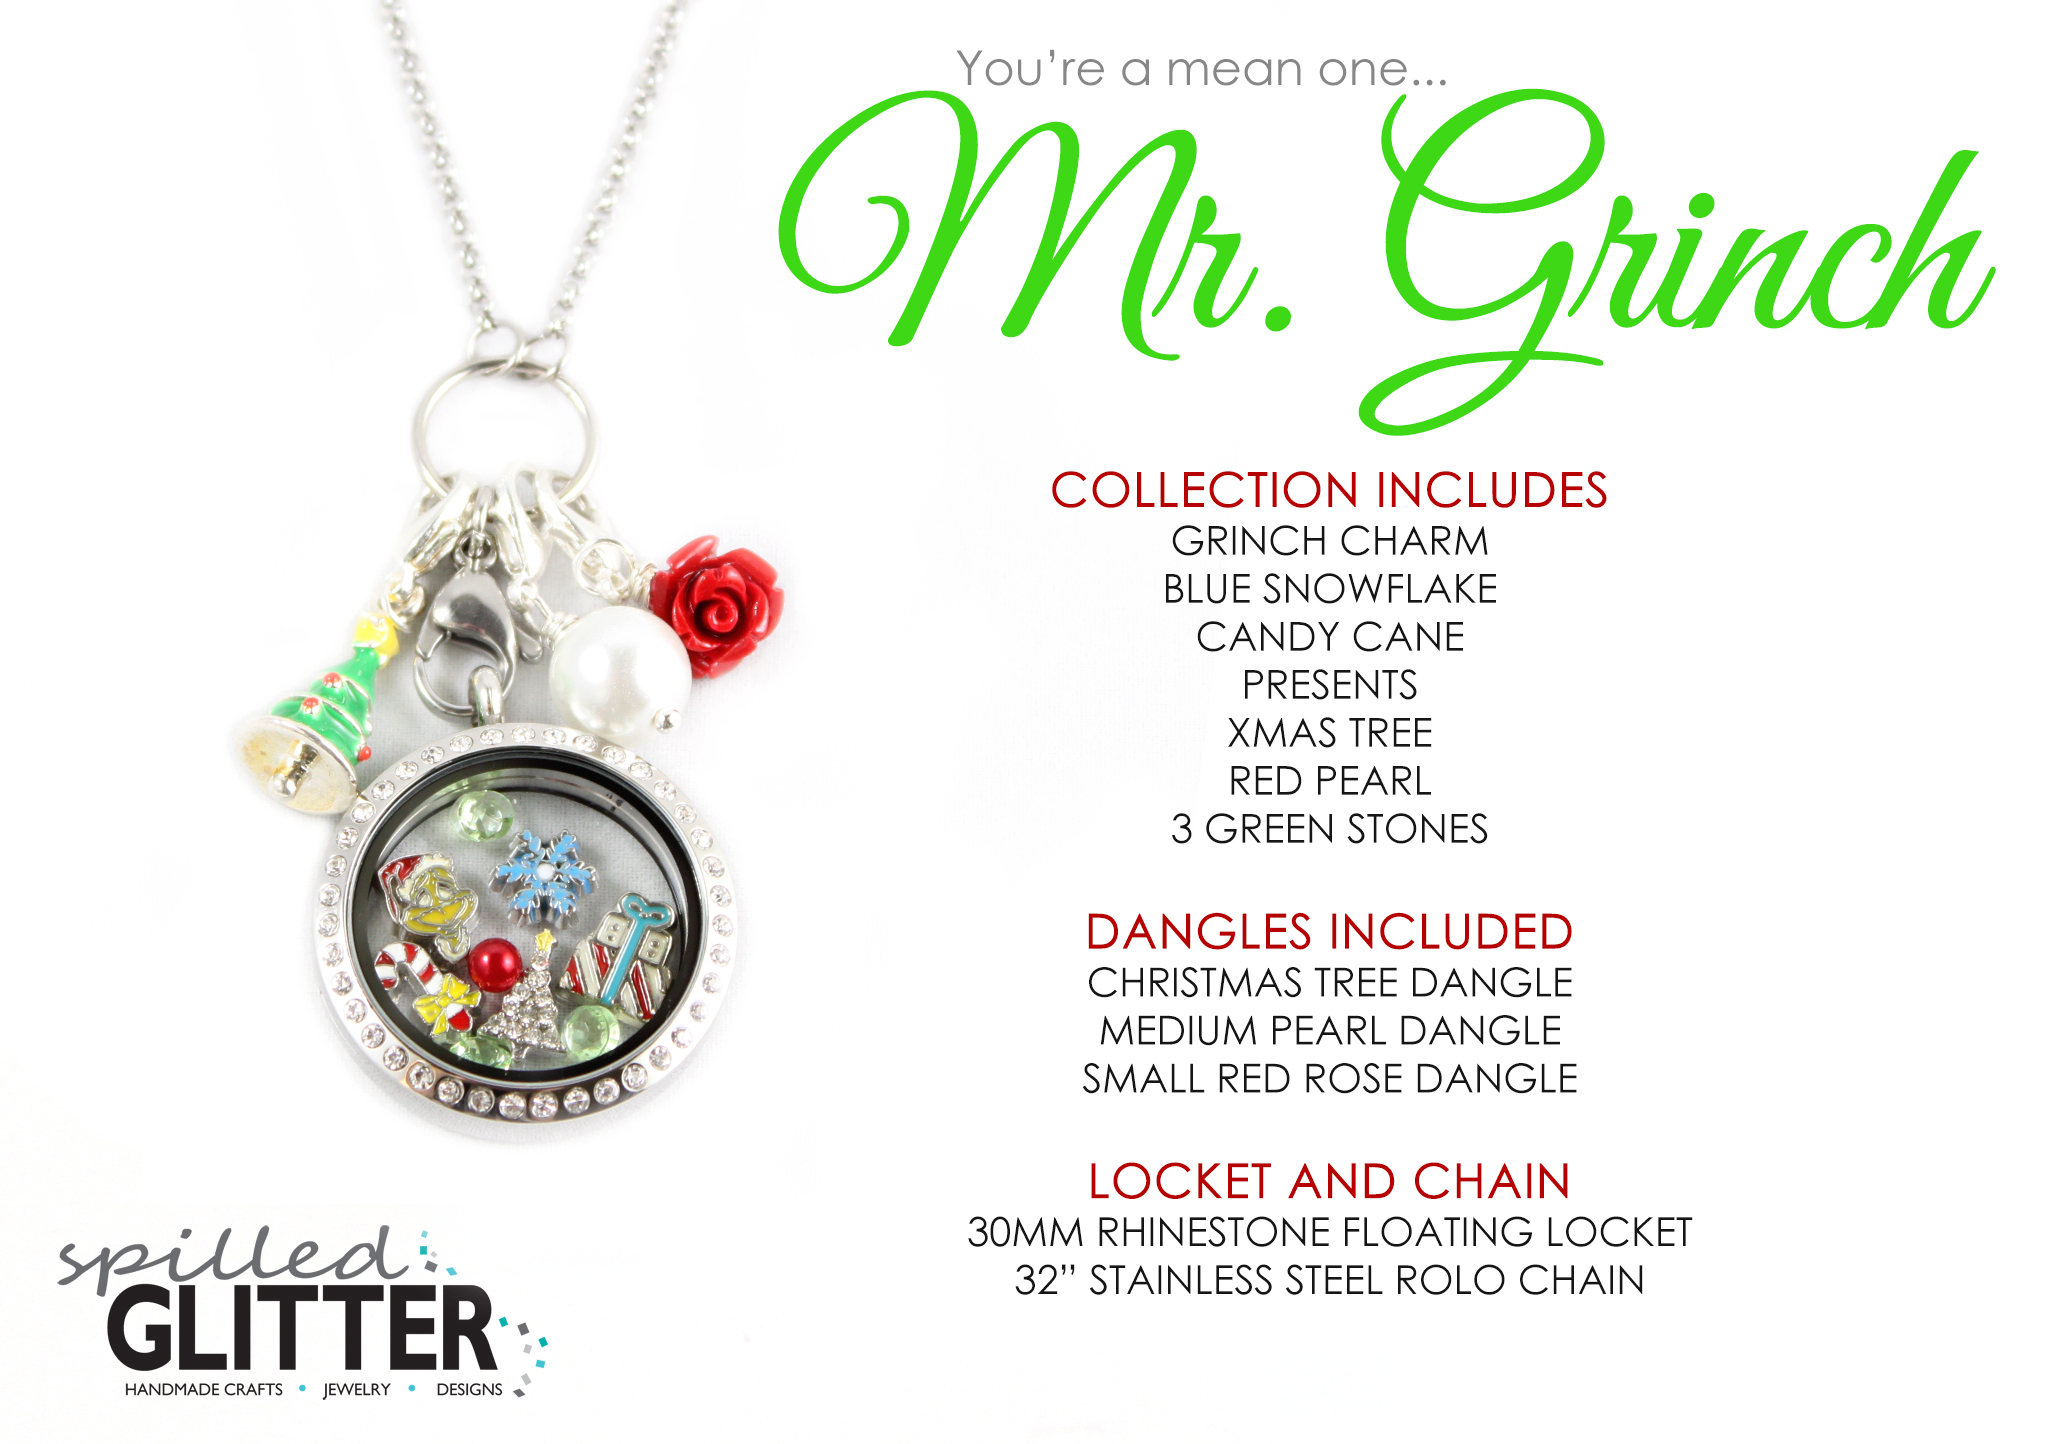 Origami Owl Customer Service Mr Grinch Christmas Holiday Floating Locket And Charm Collection